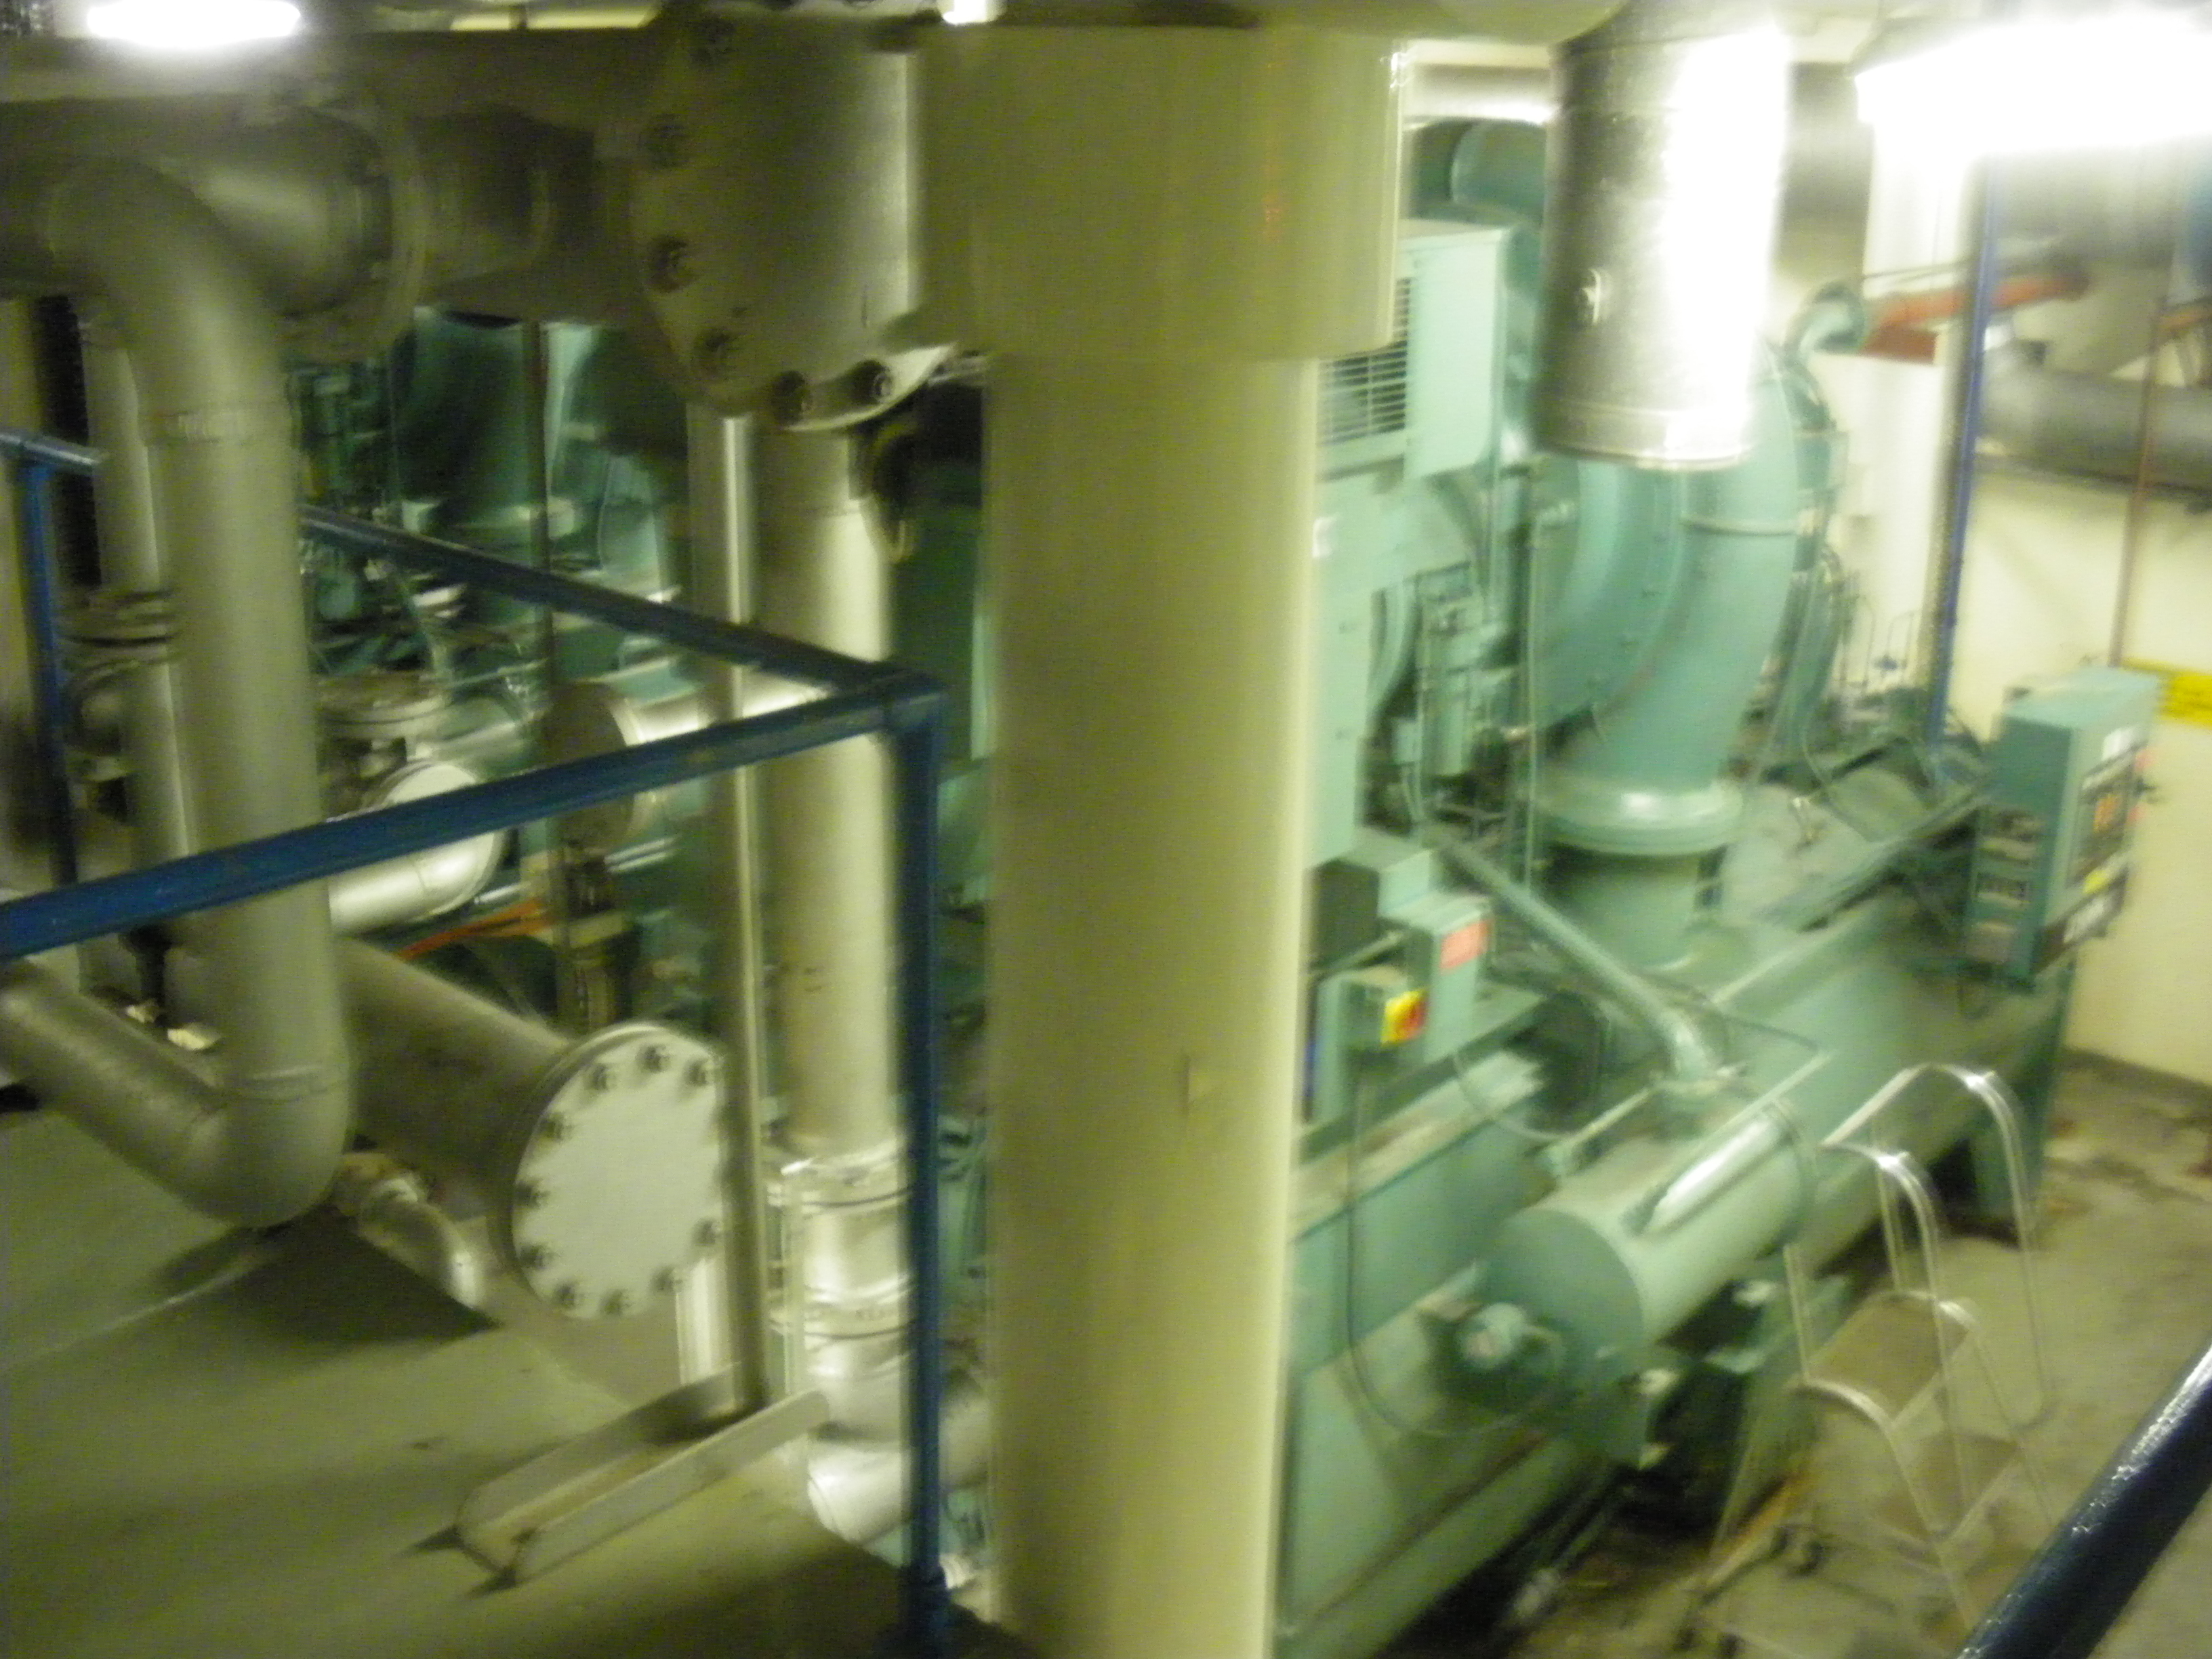 One of the two York chillers in the Refrigeration Plant